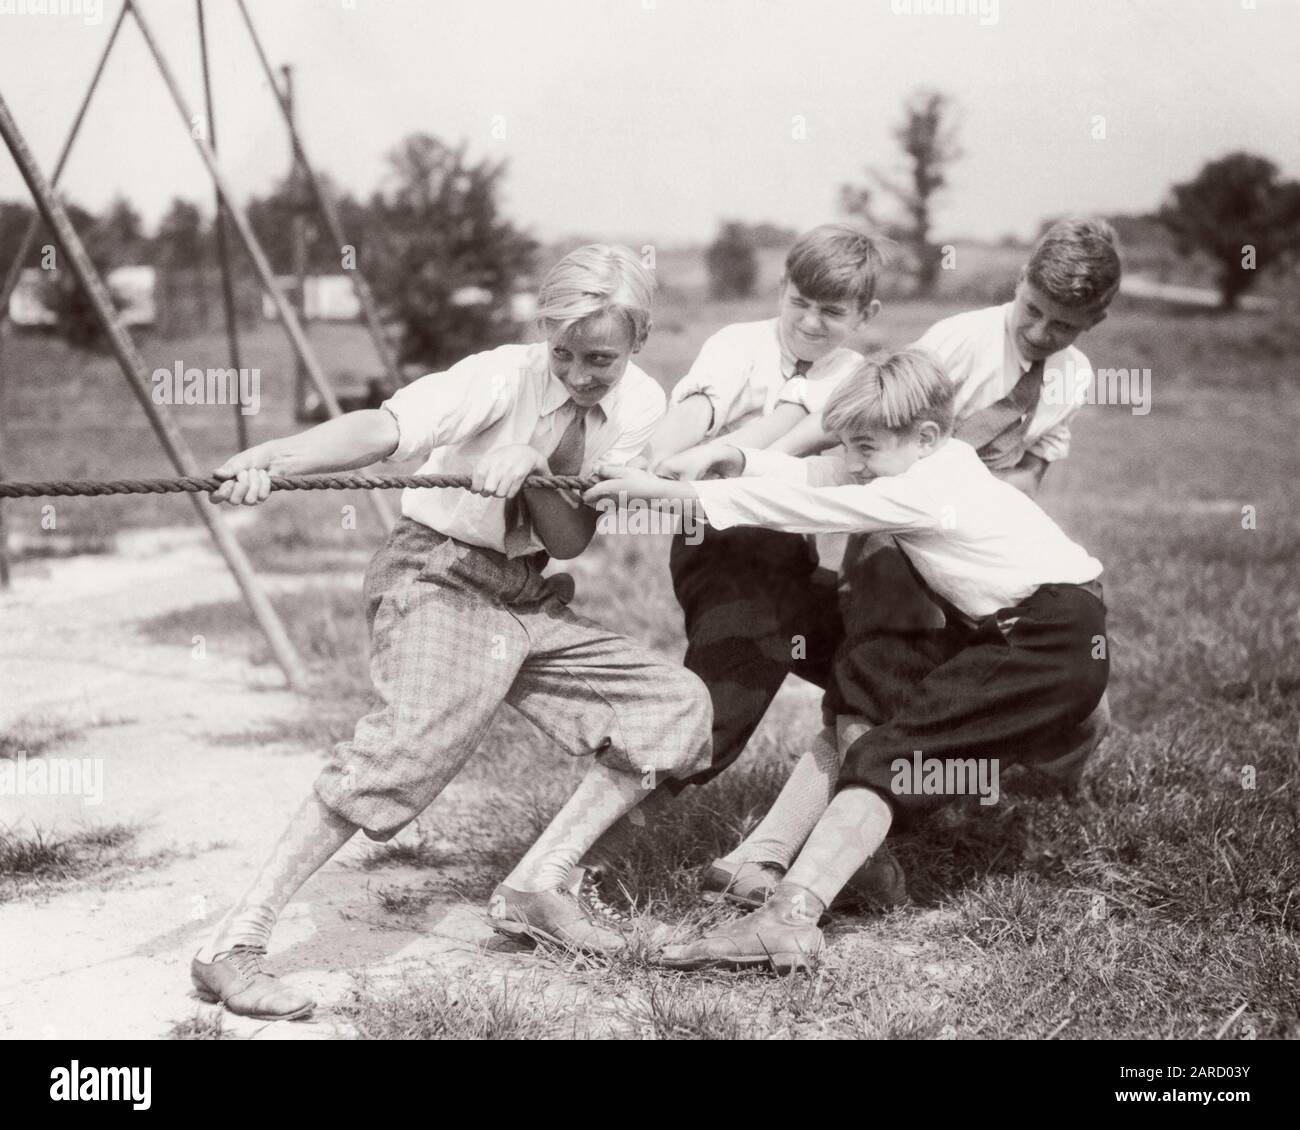 1930s 4 BOYS  PULLING ON ROPE PLAYING TUG OF WAR ON PLAYGROUND ALL WEARING SHORT PANTS KNICKERS SOCKS WHITE SHIRTS TIES - b12009 HAR001 HARS KNICKERS JOY LIFESTYLE SATISFACTION RURAL HEALTHINESS ATHLETICS COPY SPACE FRIENDSHIP FULL-LENGTH PHYSICAL FITNESS MALES ATHLETIC CONFIDENCE B&W ACTIVITY PHYSICAL HIGH ANGLE STRENGTH EXCITEMENT RECESS RECREATION SHIRTS PRIDE ON CONNECTION CONCEPTUAL ATHLETES FLEXIBILITY MUSCLES STYLISH TIES TUG-OF-WAR COOPERATION GROWTH JUVENILES PRE-TEEN PRE-TEEN BOY TOGETHERNESS BLACK AND WHITE CAUCASIAN ETHNICITY HAR001 OLD FASHIONED TUG Stock Photo